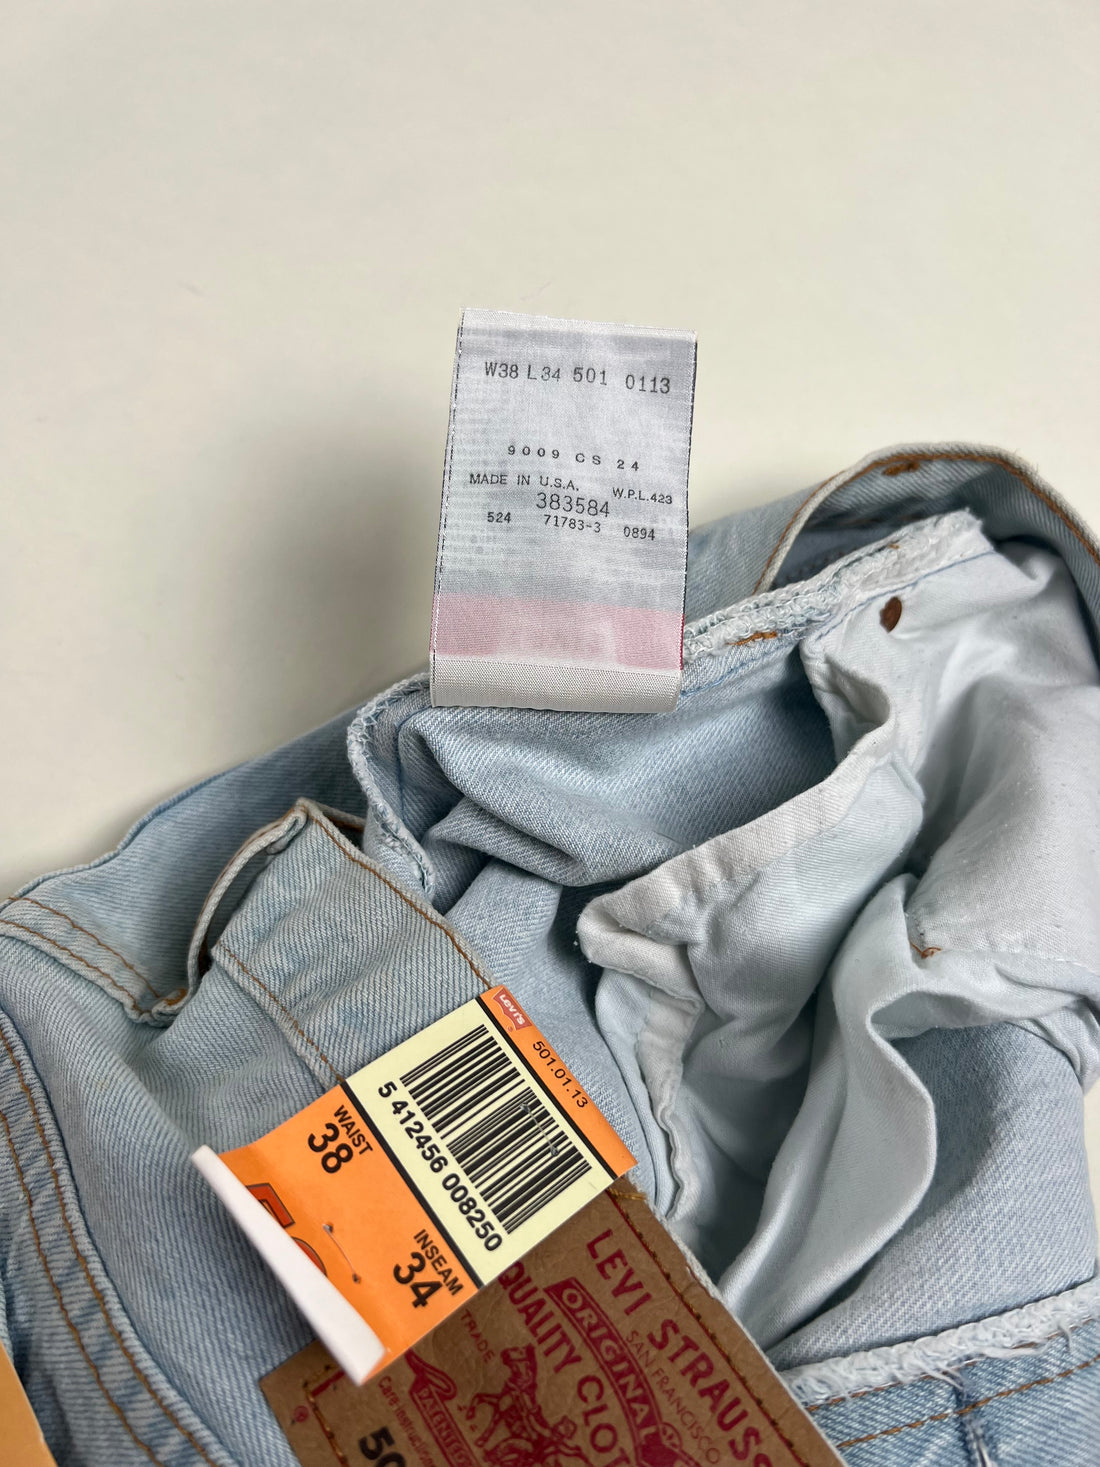 Levis 501 made in USA - W38 -